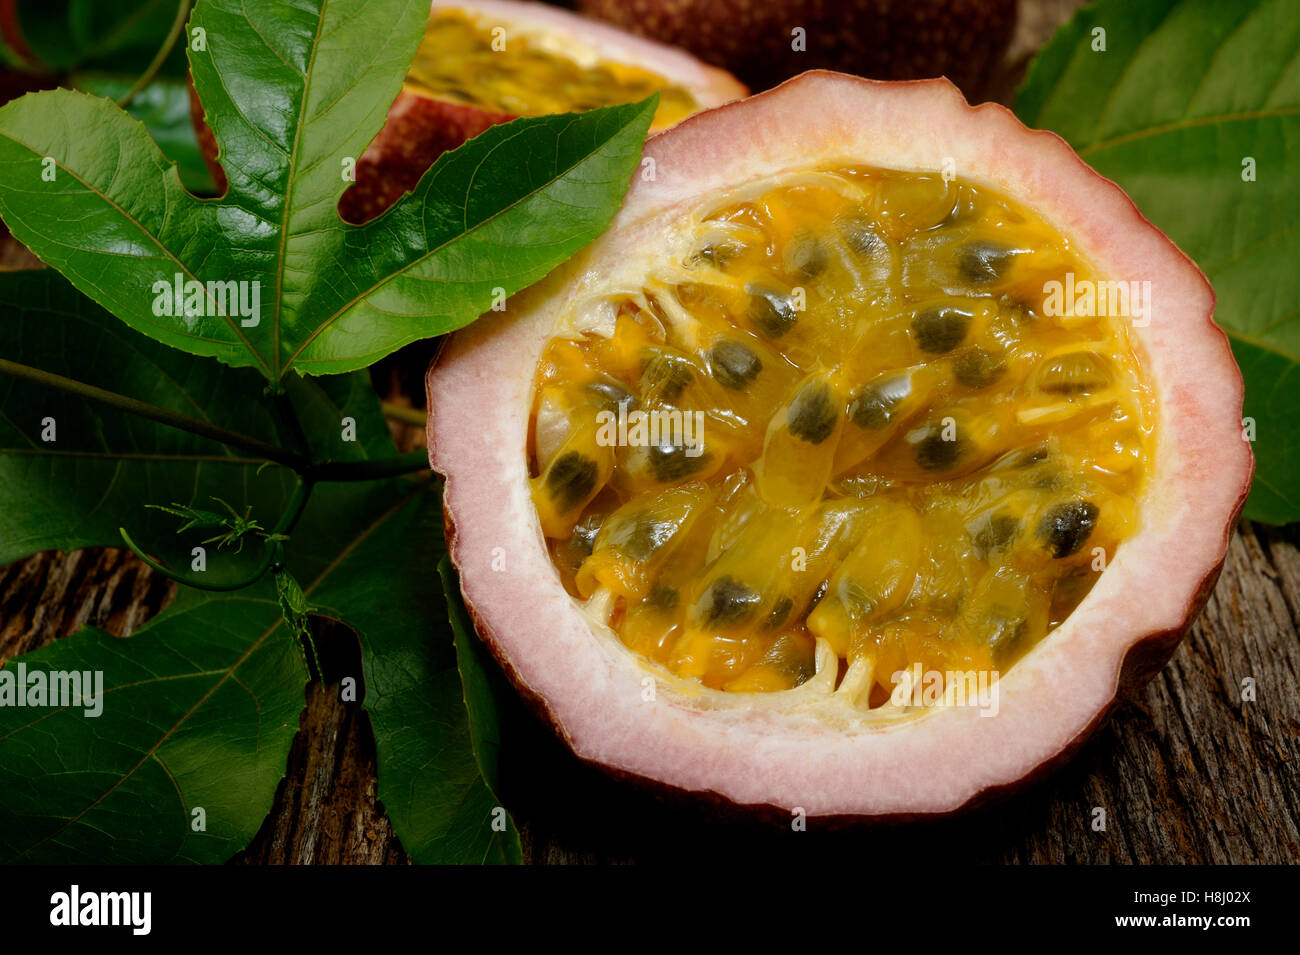 Passion fruits with leaves on wooden background Stock Photo